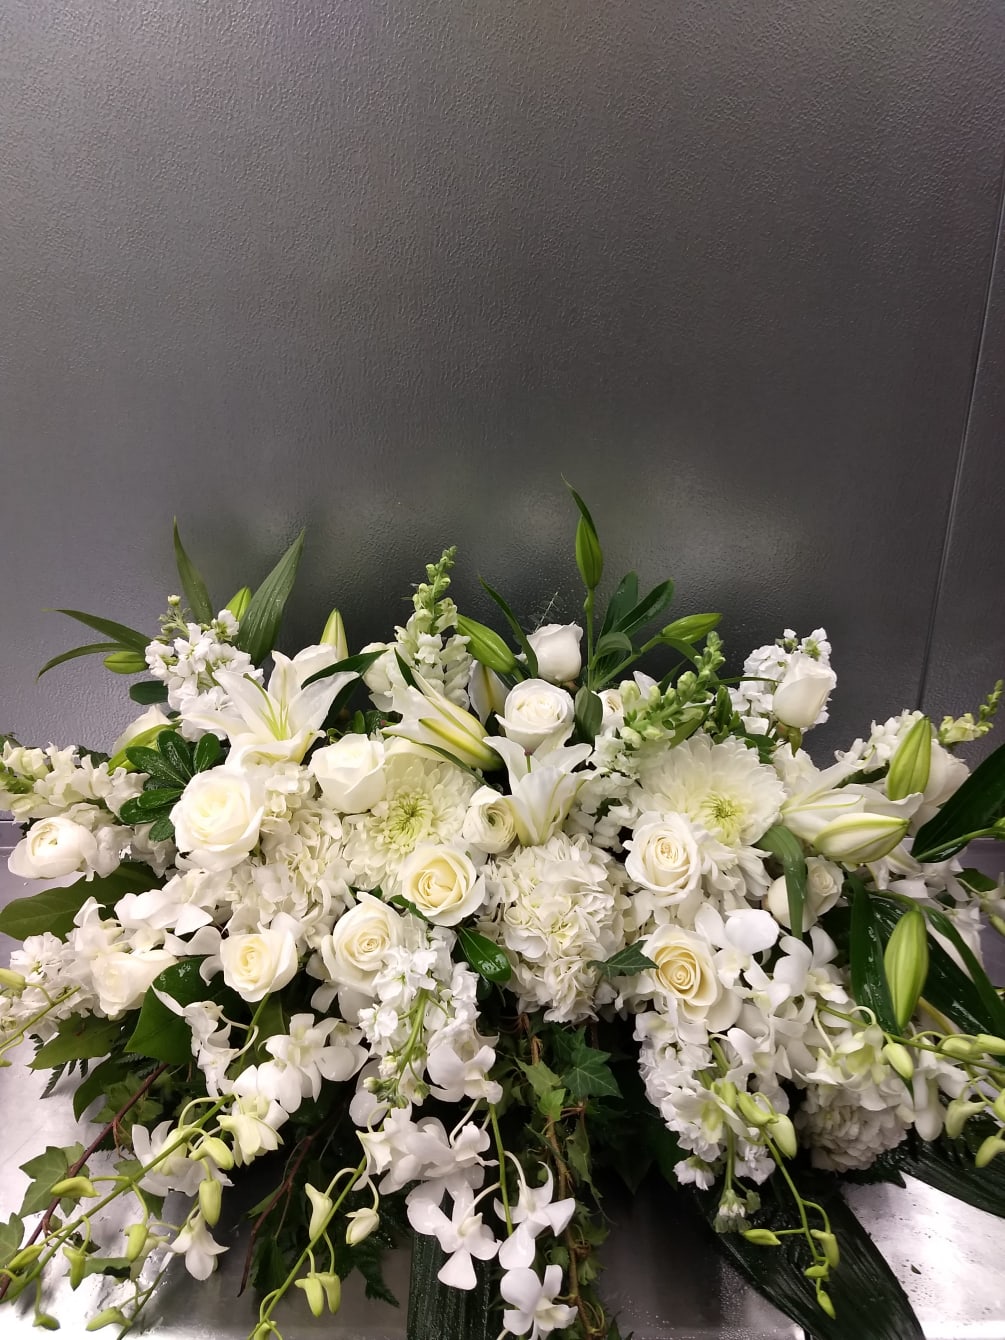 This elegant all white Casket Spray is overflowing with beautiful fragrant Lilies